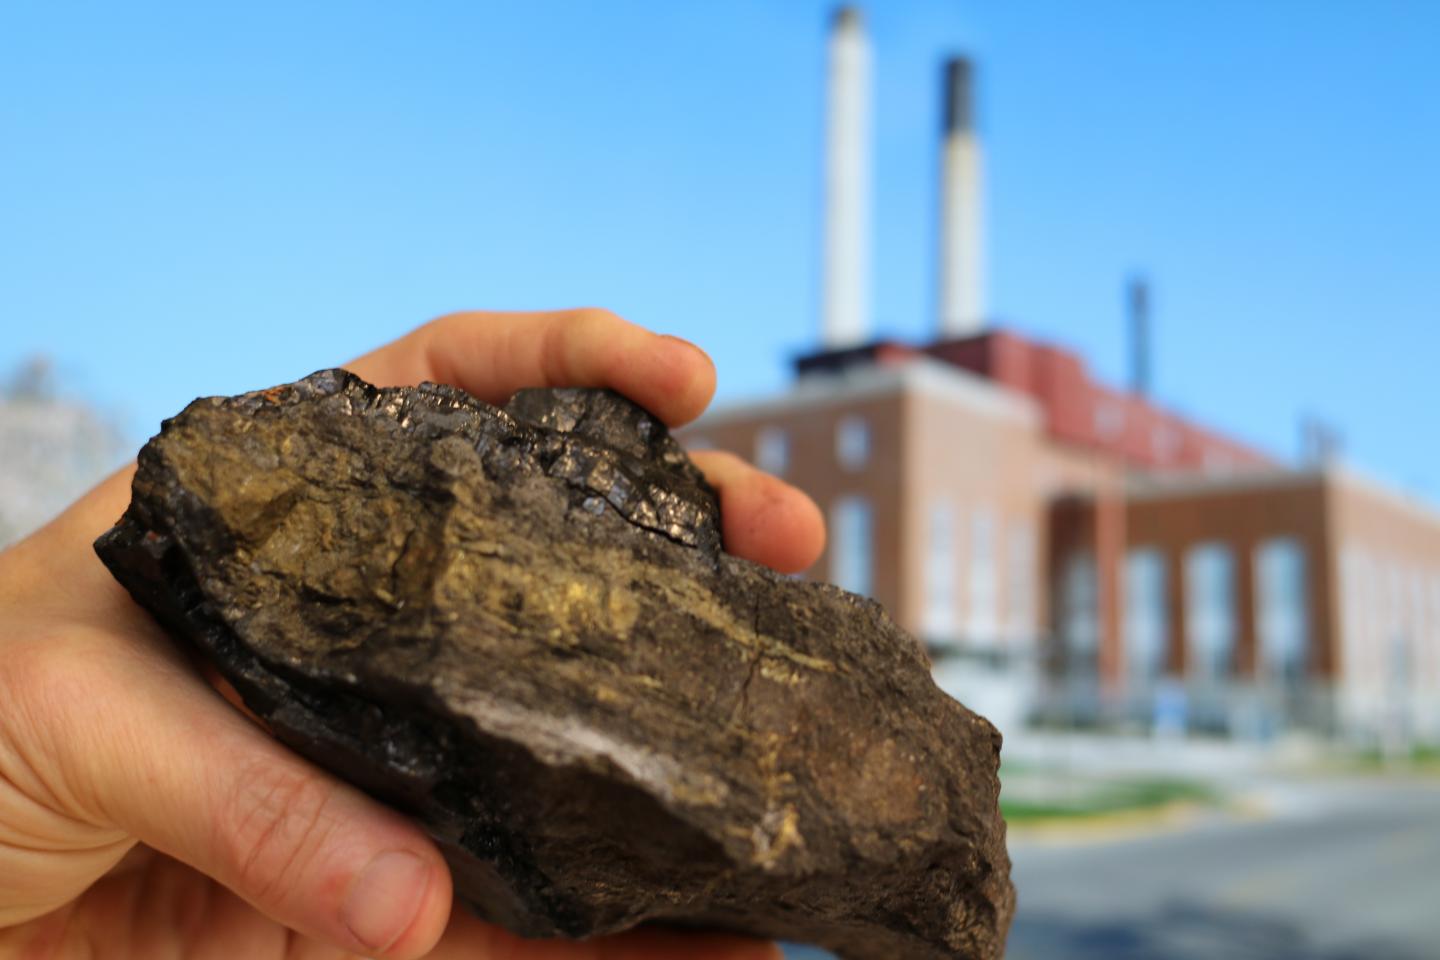 Less Coal Burned for Fuel Led to Lower Atmospheric Sulfur